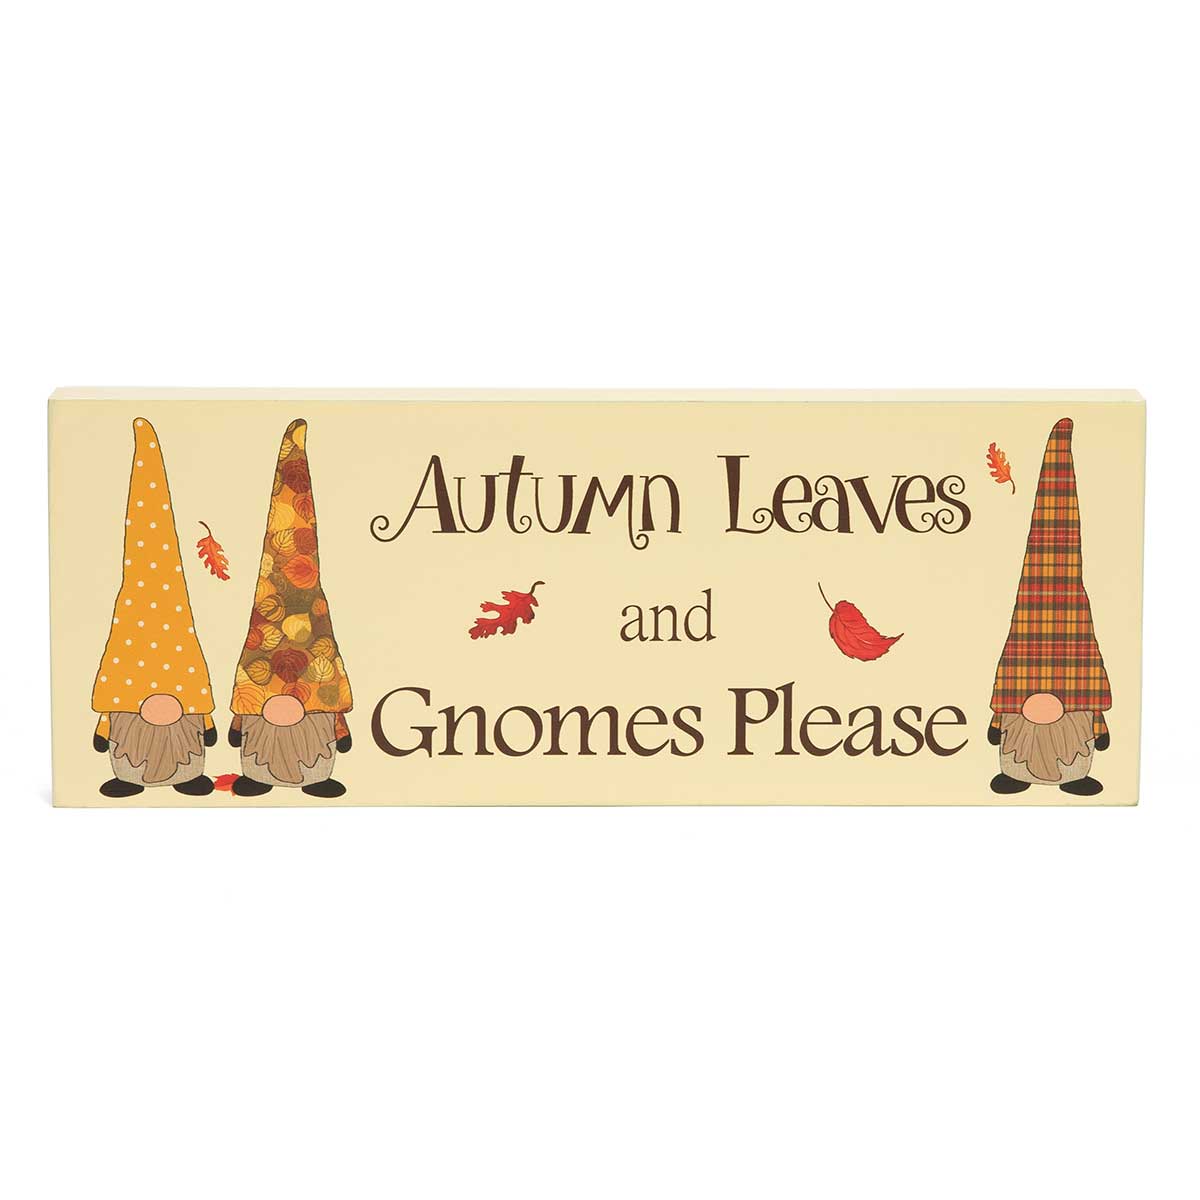 !GNOMES PLEASE WOOD BLOCK SIGN